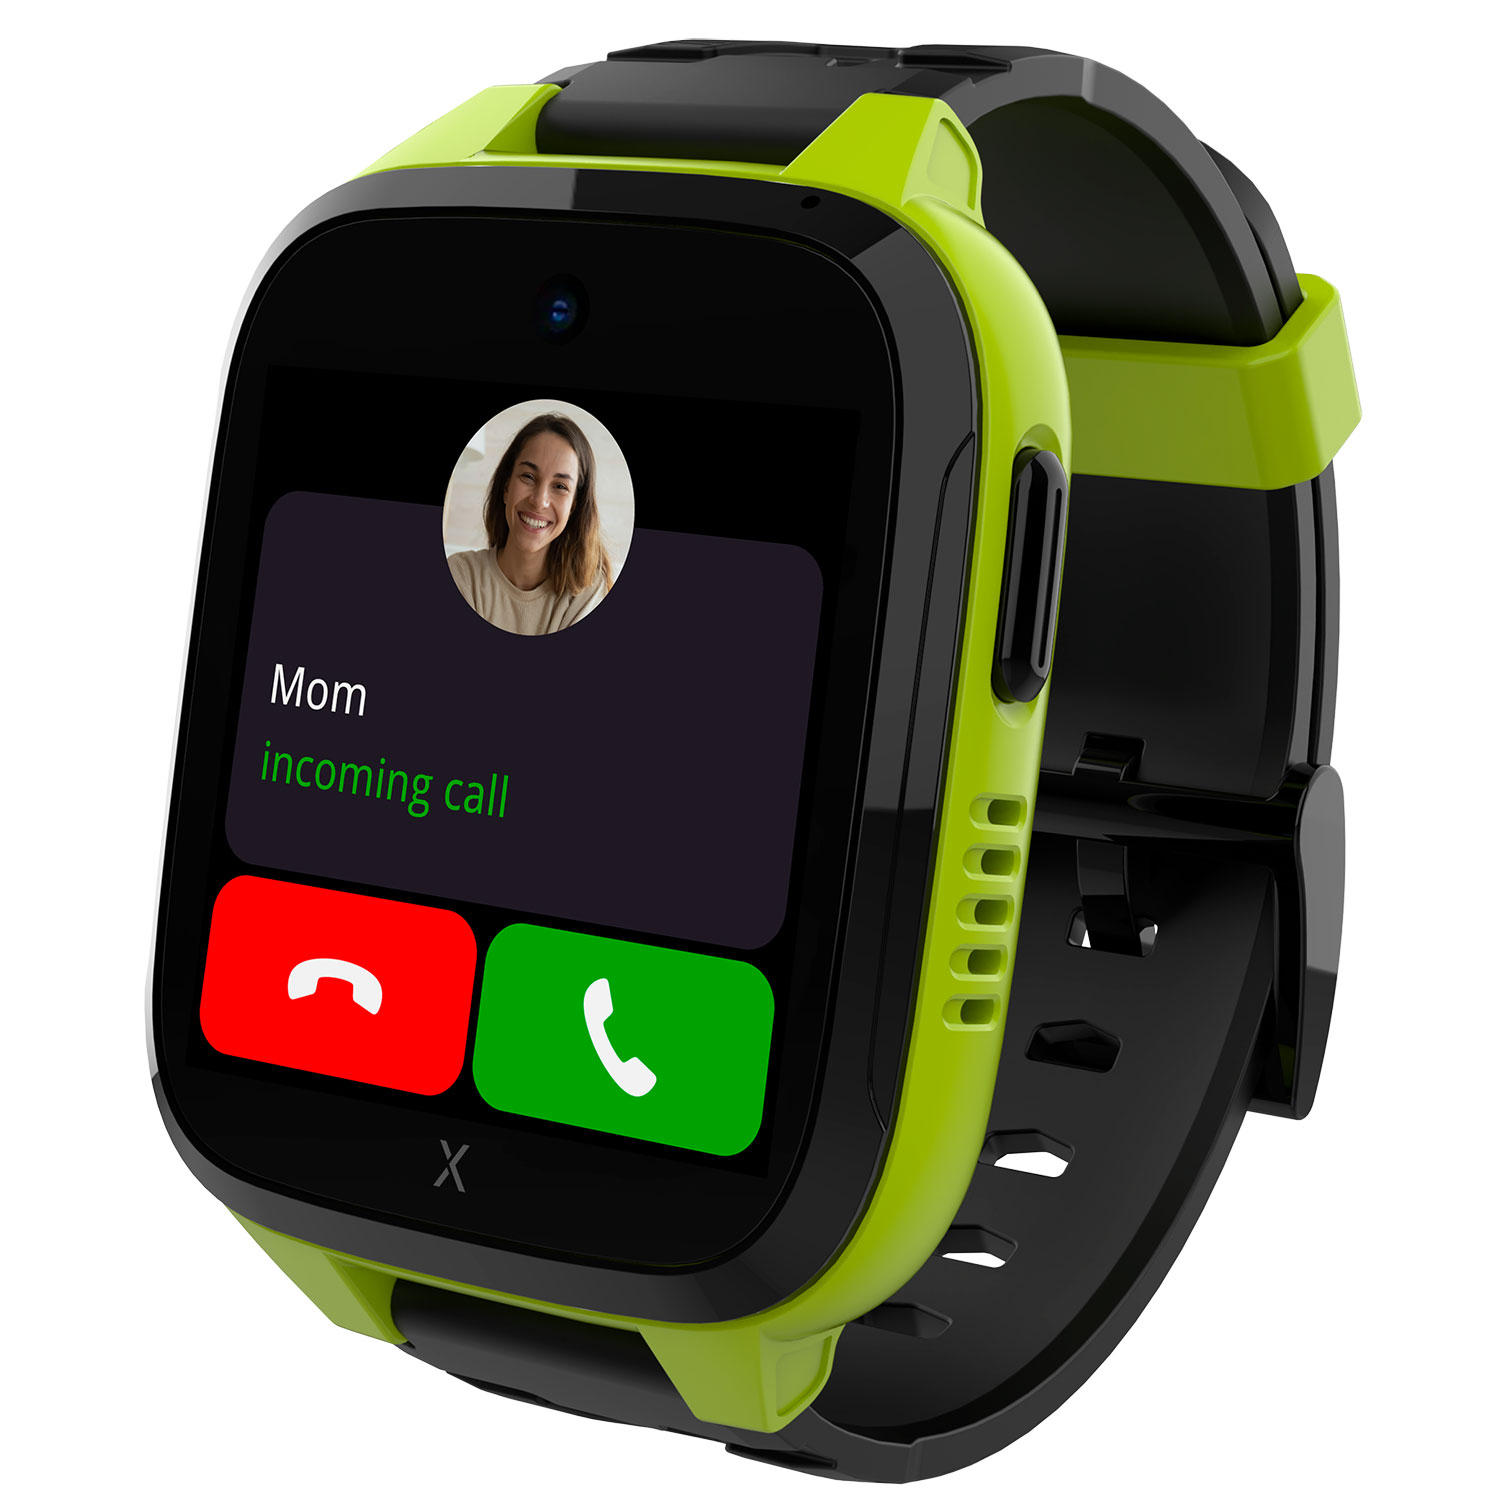 XGO3 Green Kids Smart Watch Cell Phone with GPS and SIM Card - Green